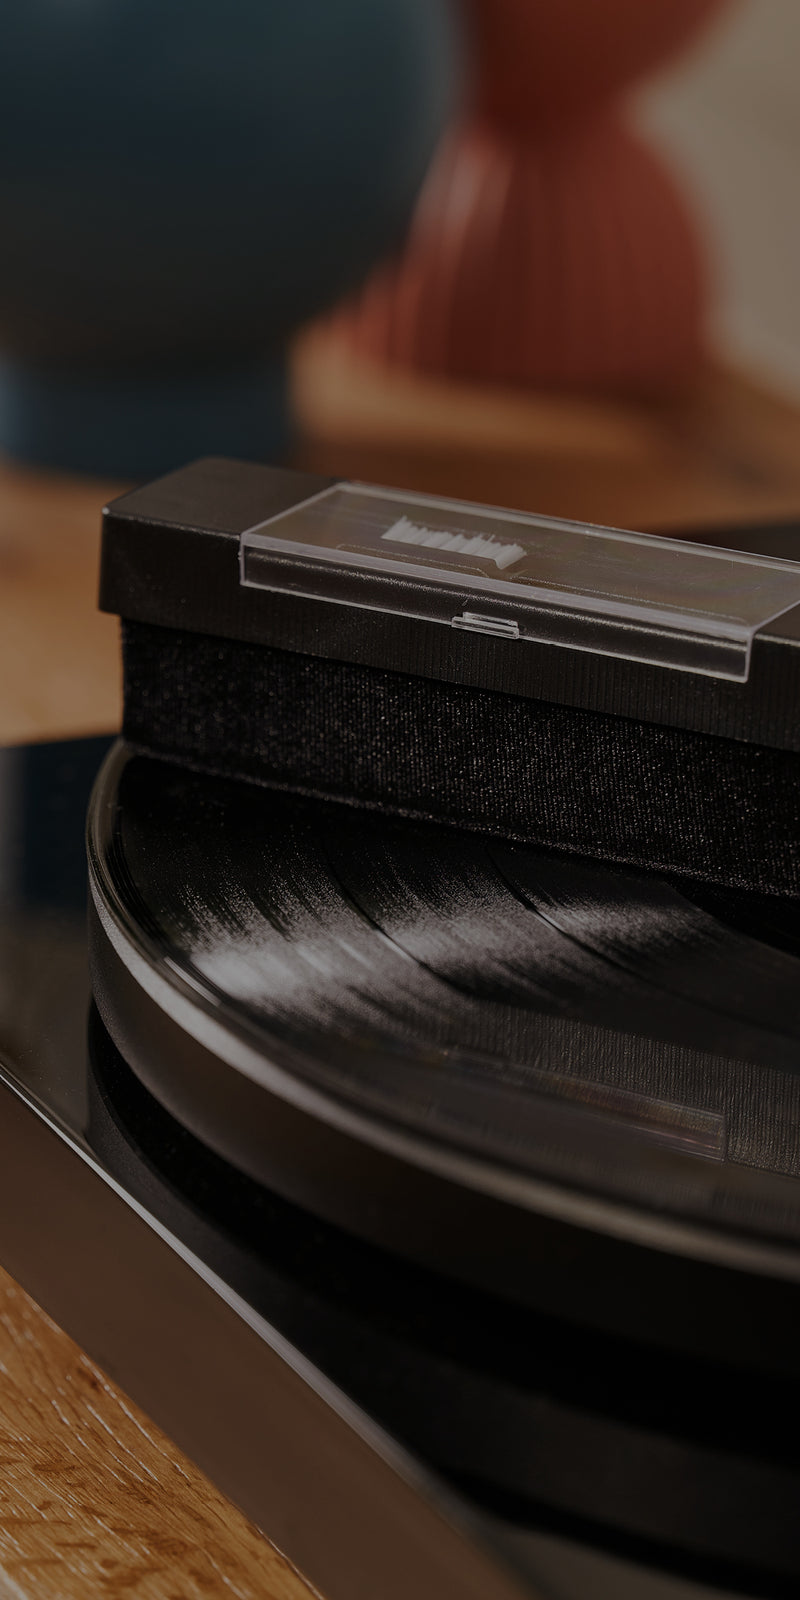 A record cleaning brush cleans a vinyl record on a turntable.